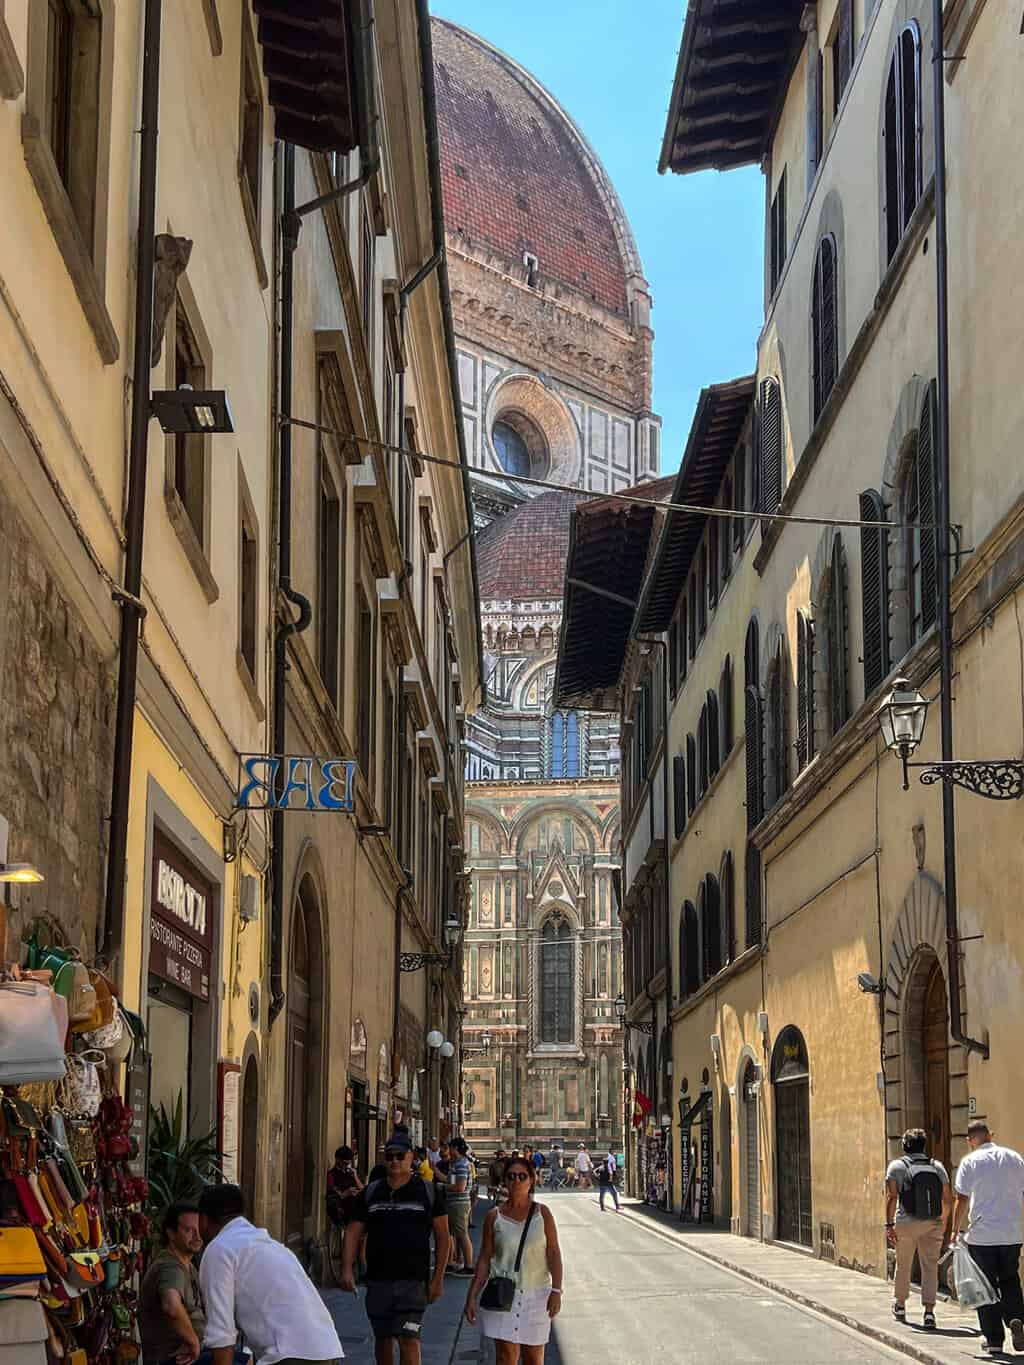 At the end of a narrow street in Florence you can see the enormous dome of the Florence Cathedral.